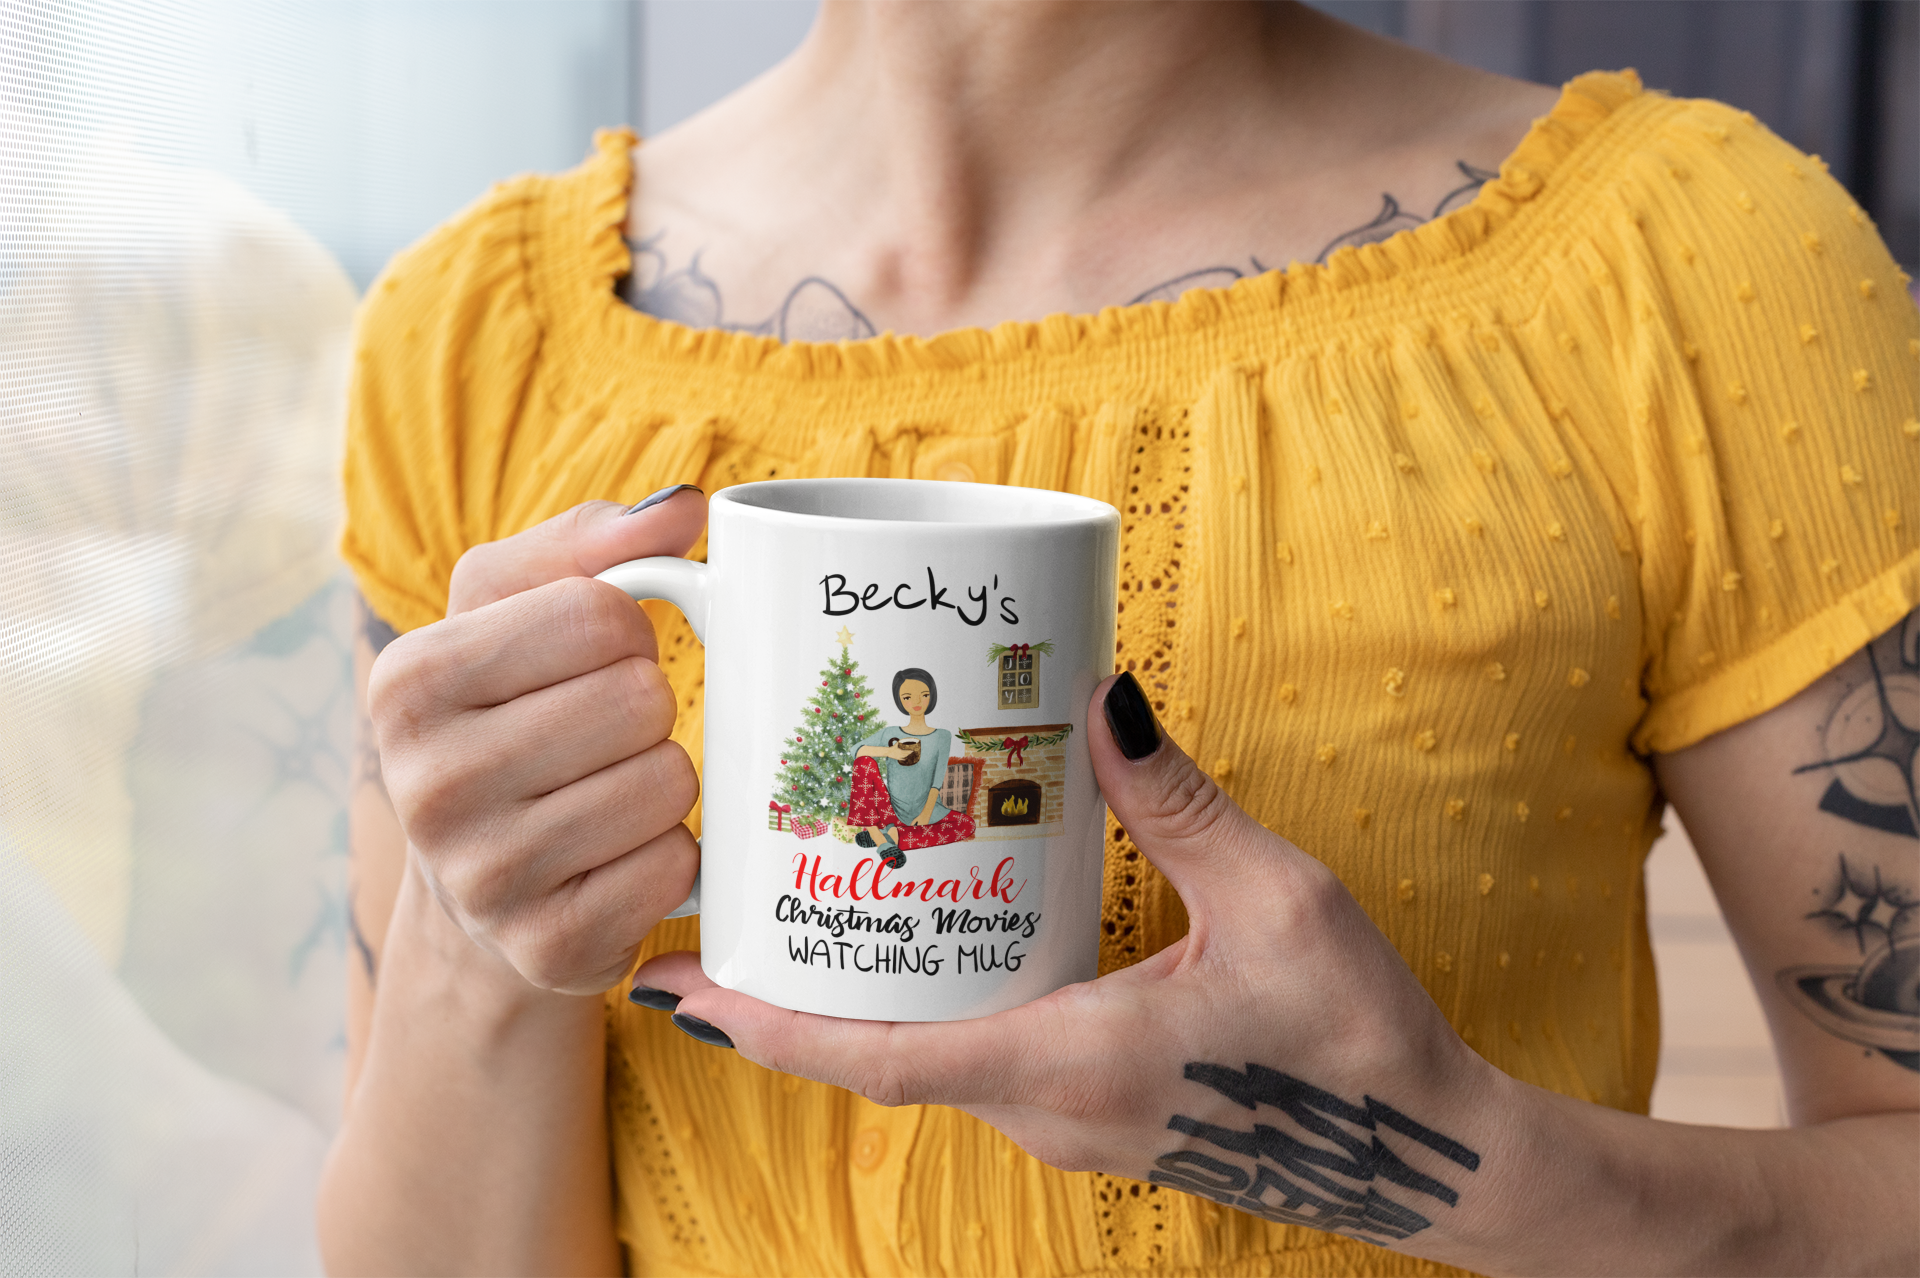 https://lotth.com/cdn/shop/products/11-oz-coffee-mug-mockup-featuring-a-woman-with-multiple-tattoos-27240_1024x1024@2x.png?v=1570524268